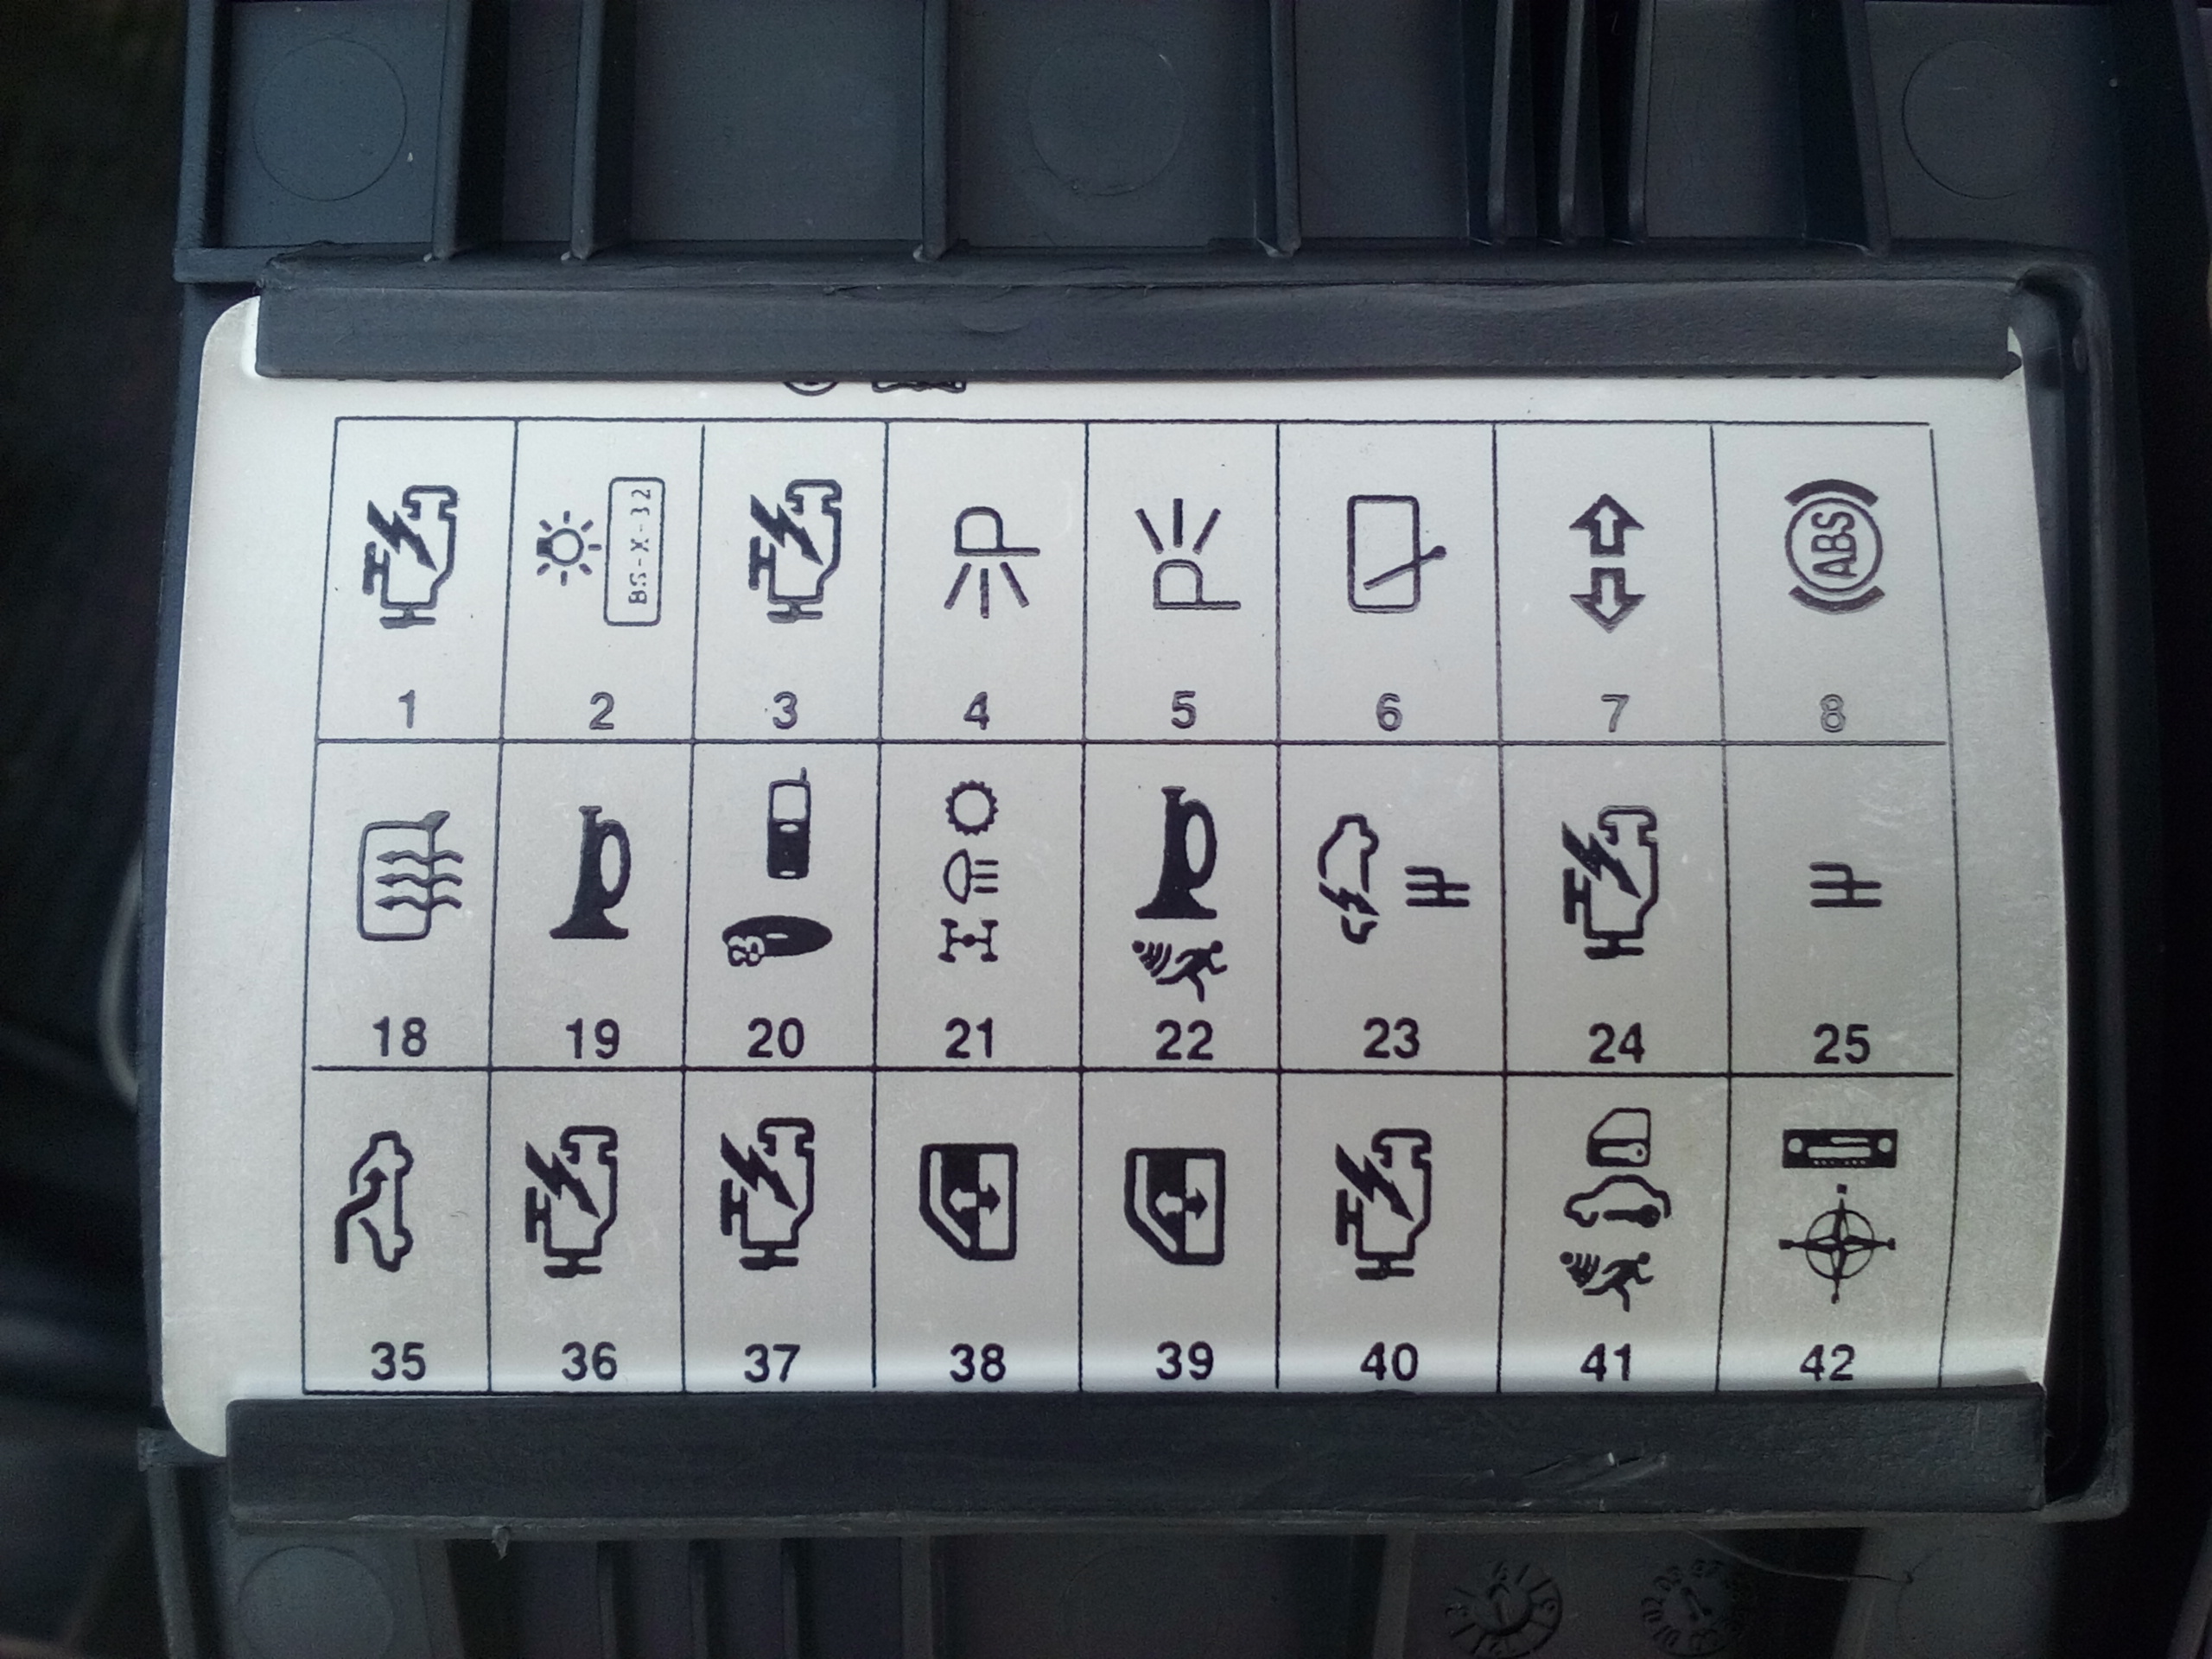 Vw Polo Iii 6n2 I Am Looking For A Description Of Fuse Symbols